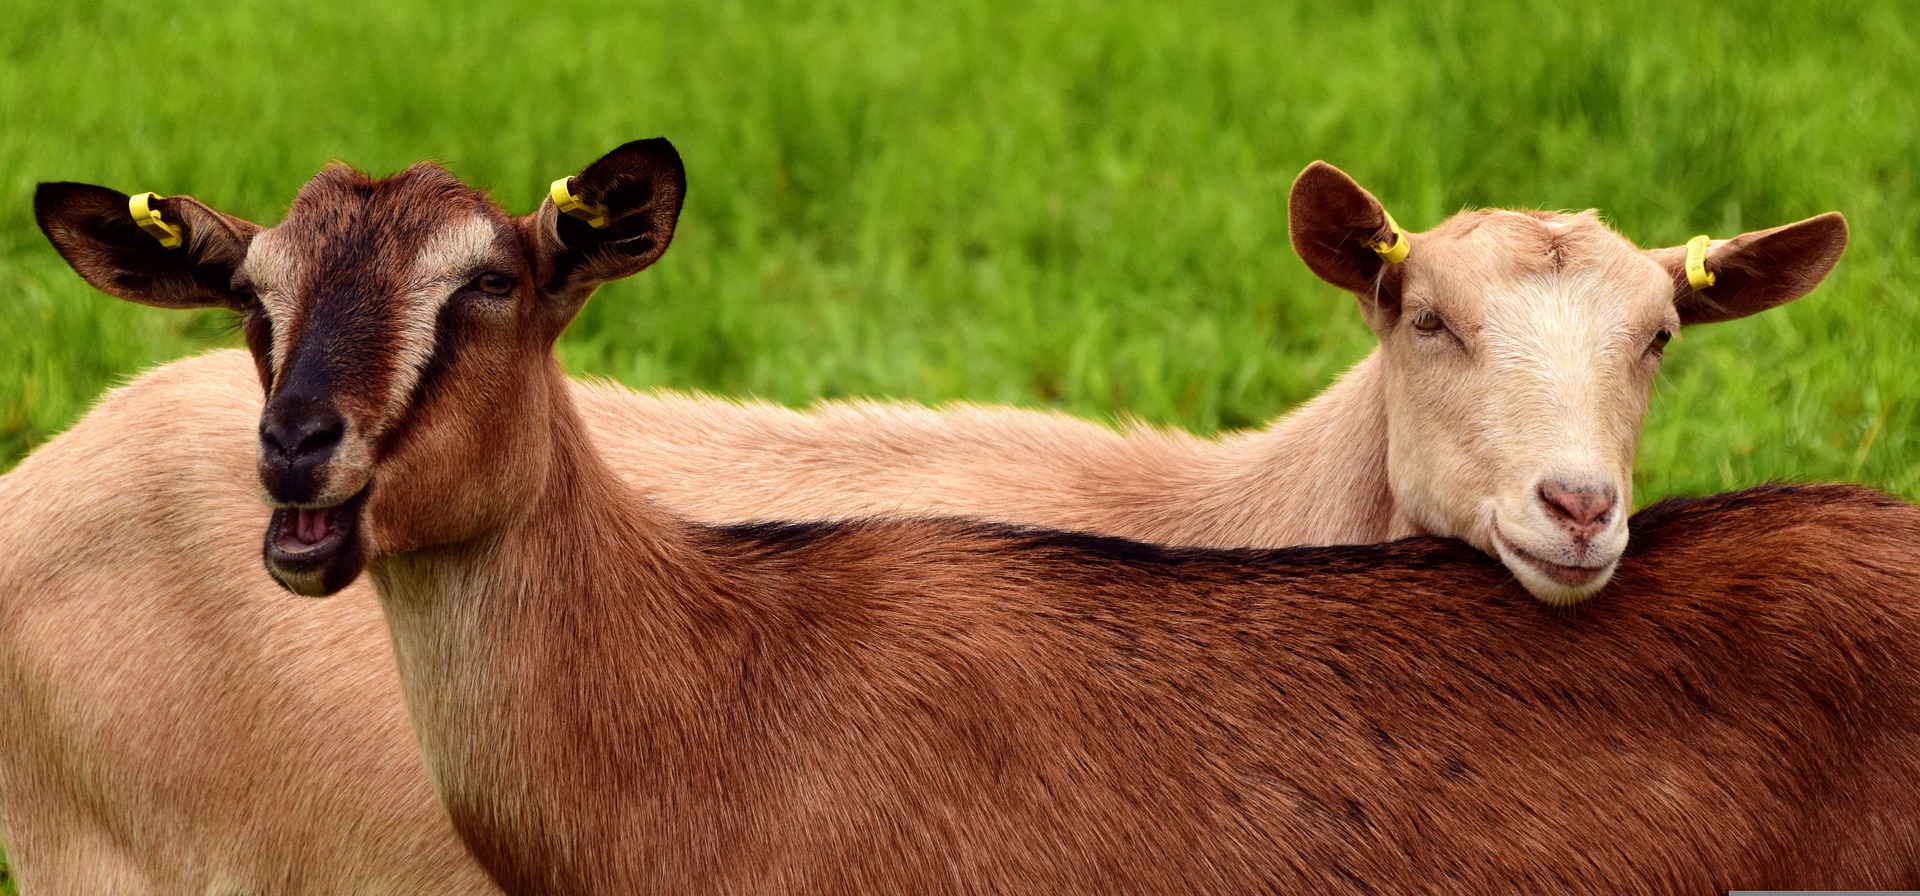 Diagnosis of Listeriosis in Goat